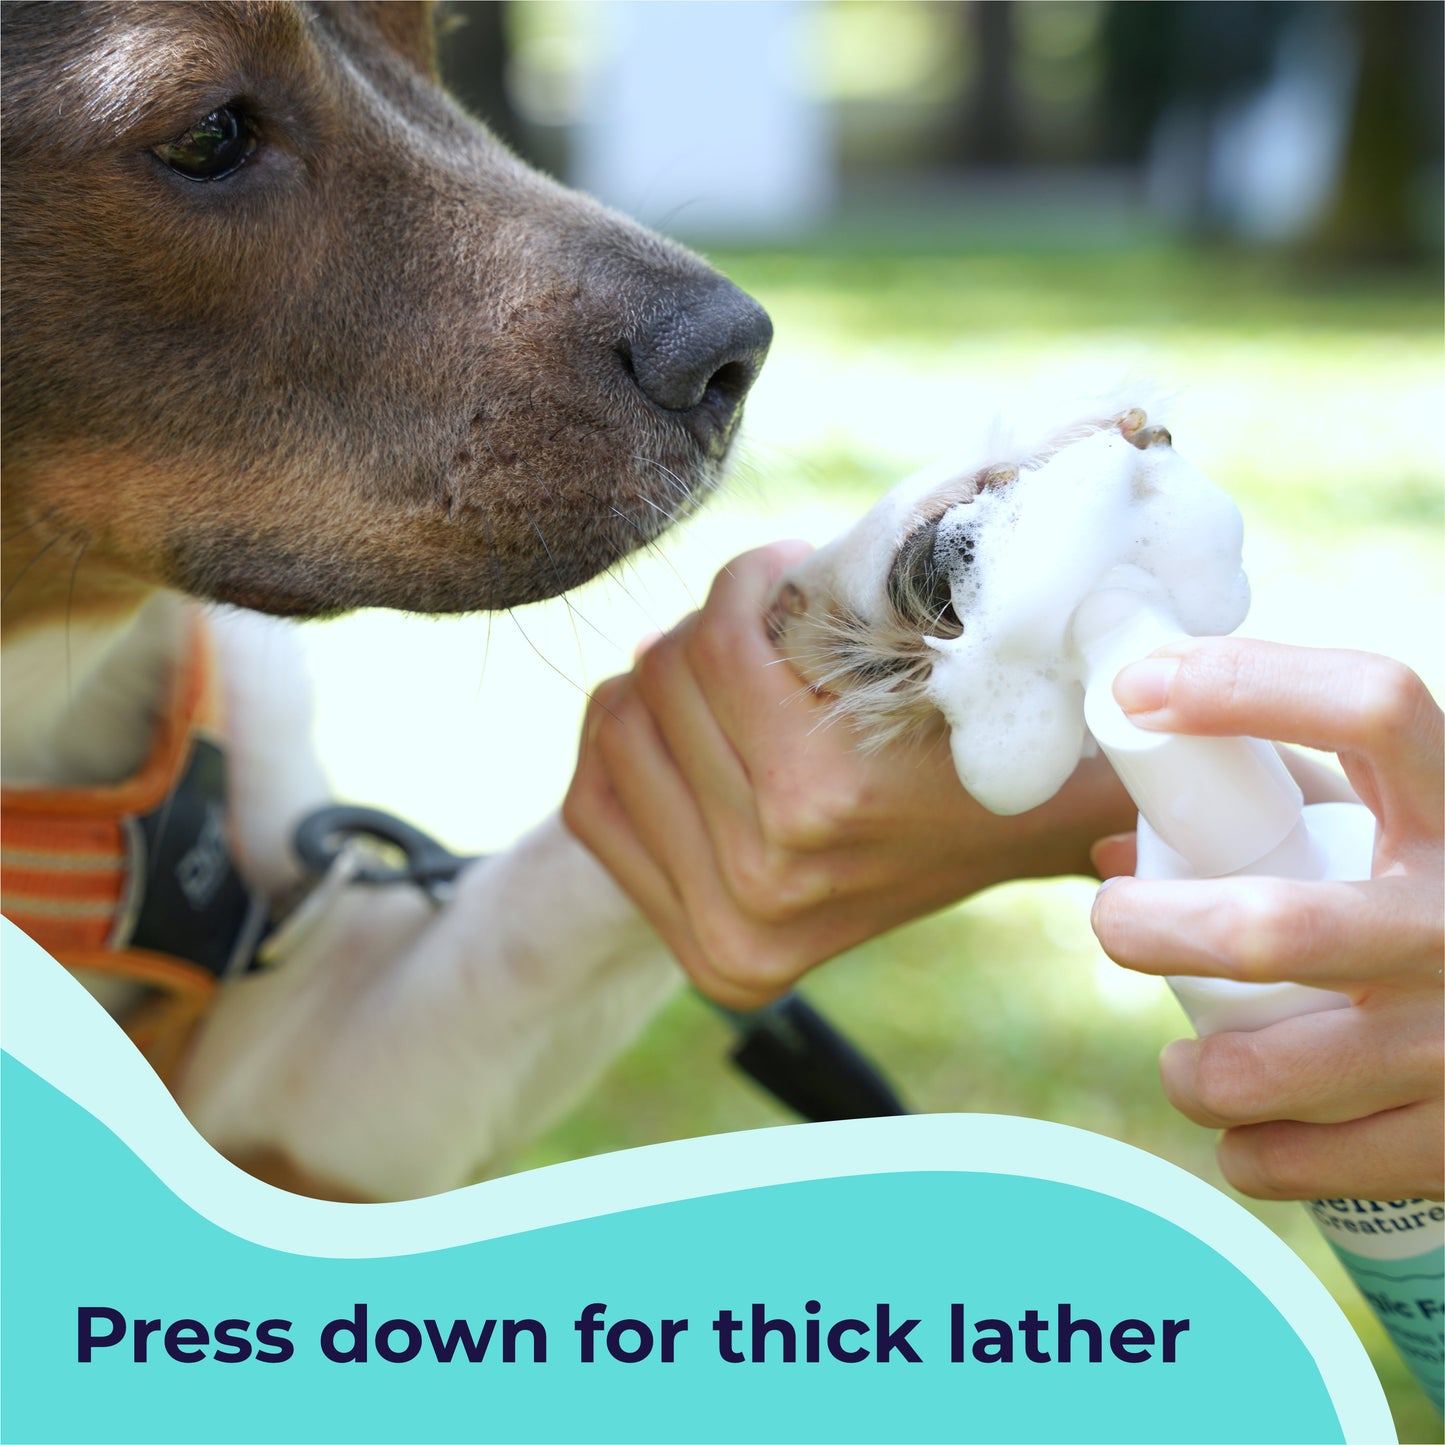 Press down for thick lather